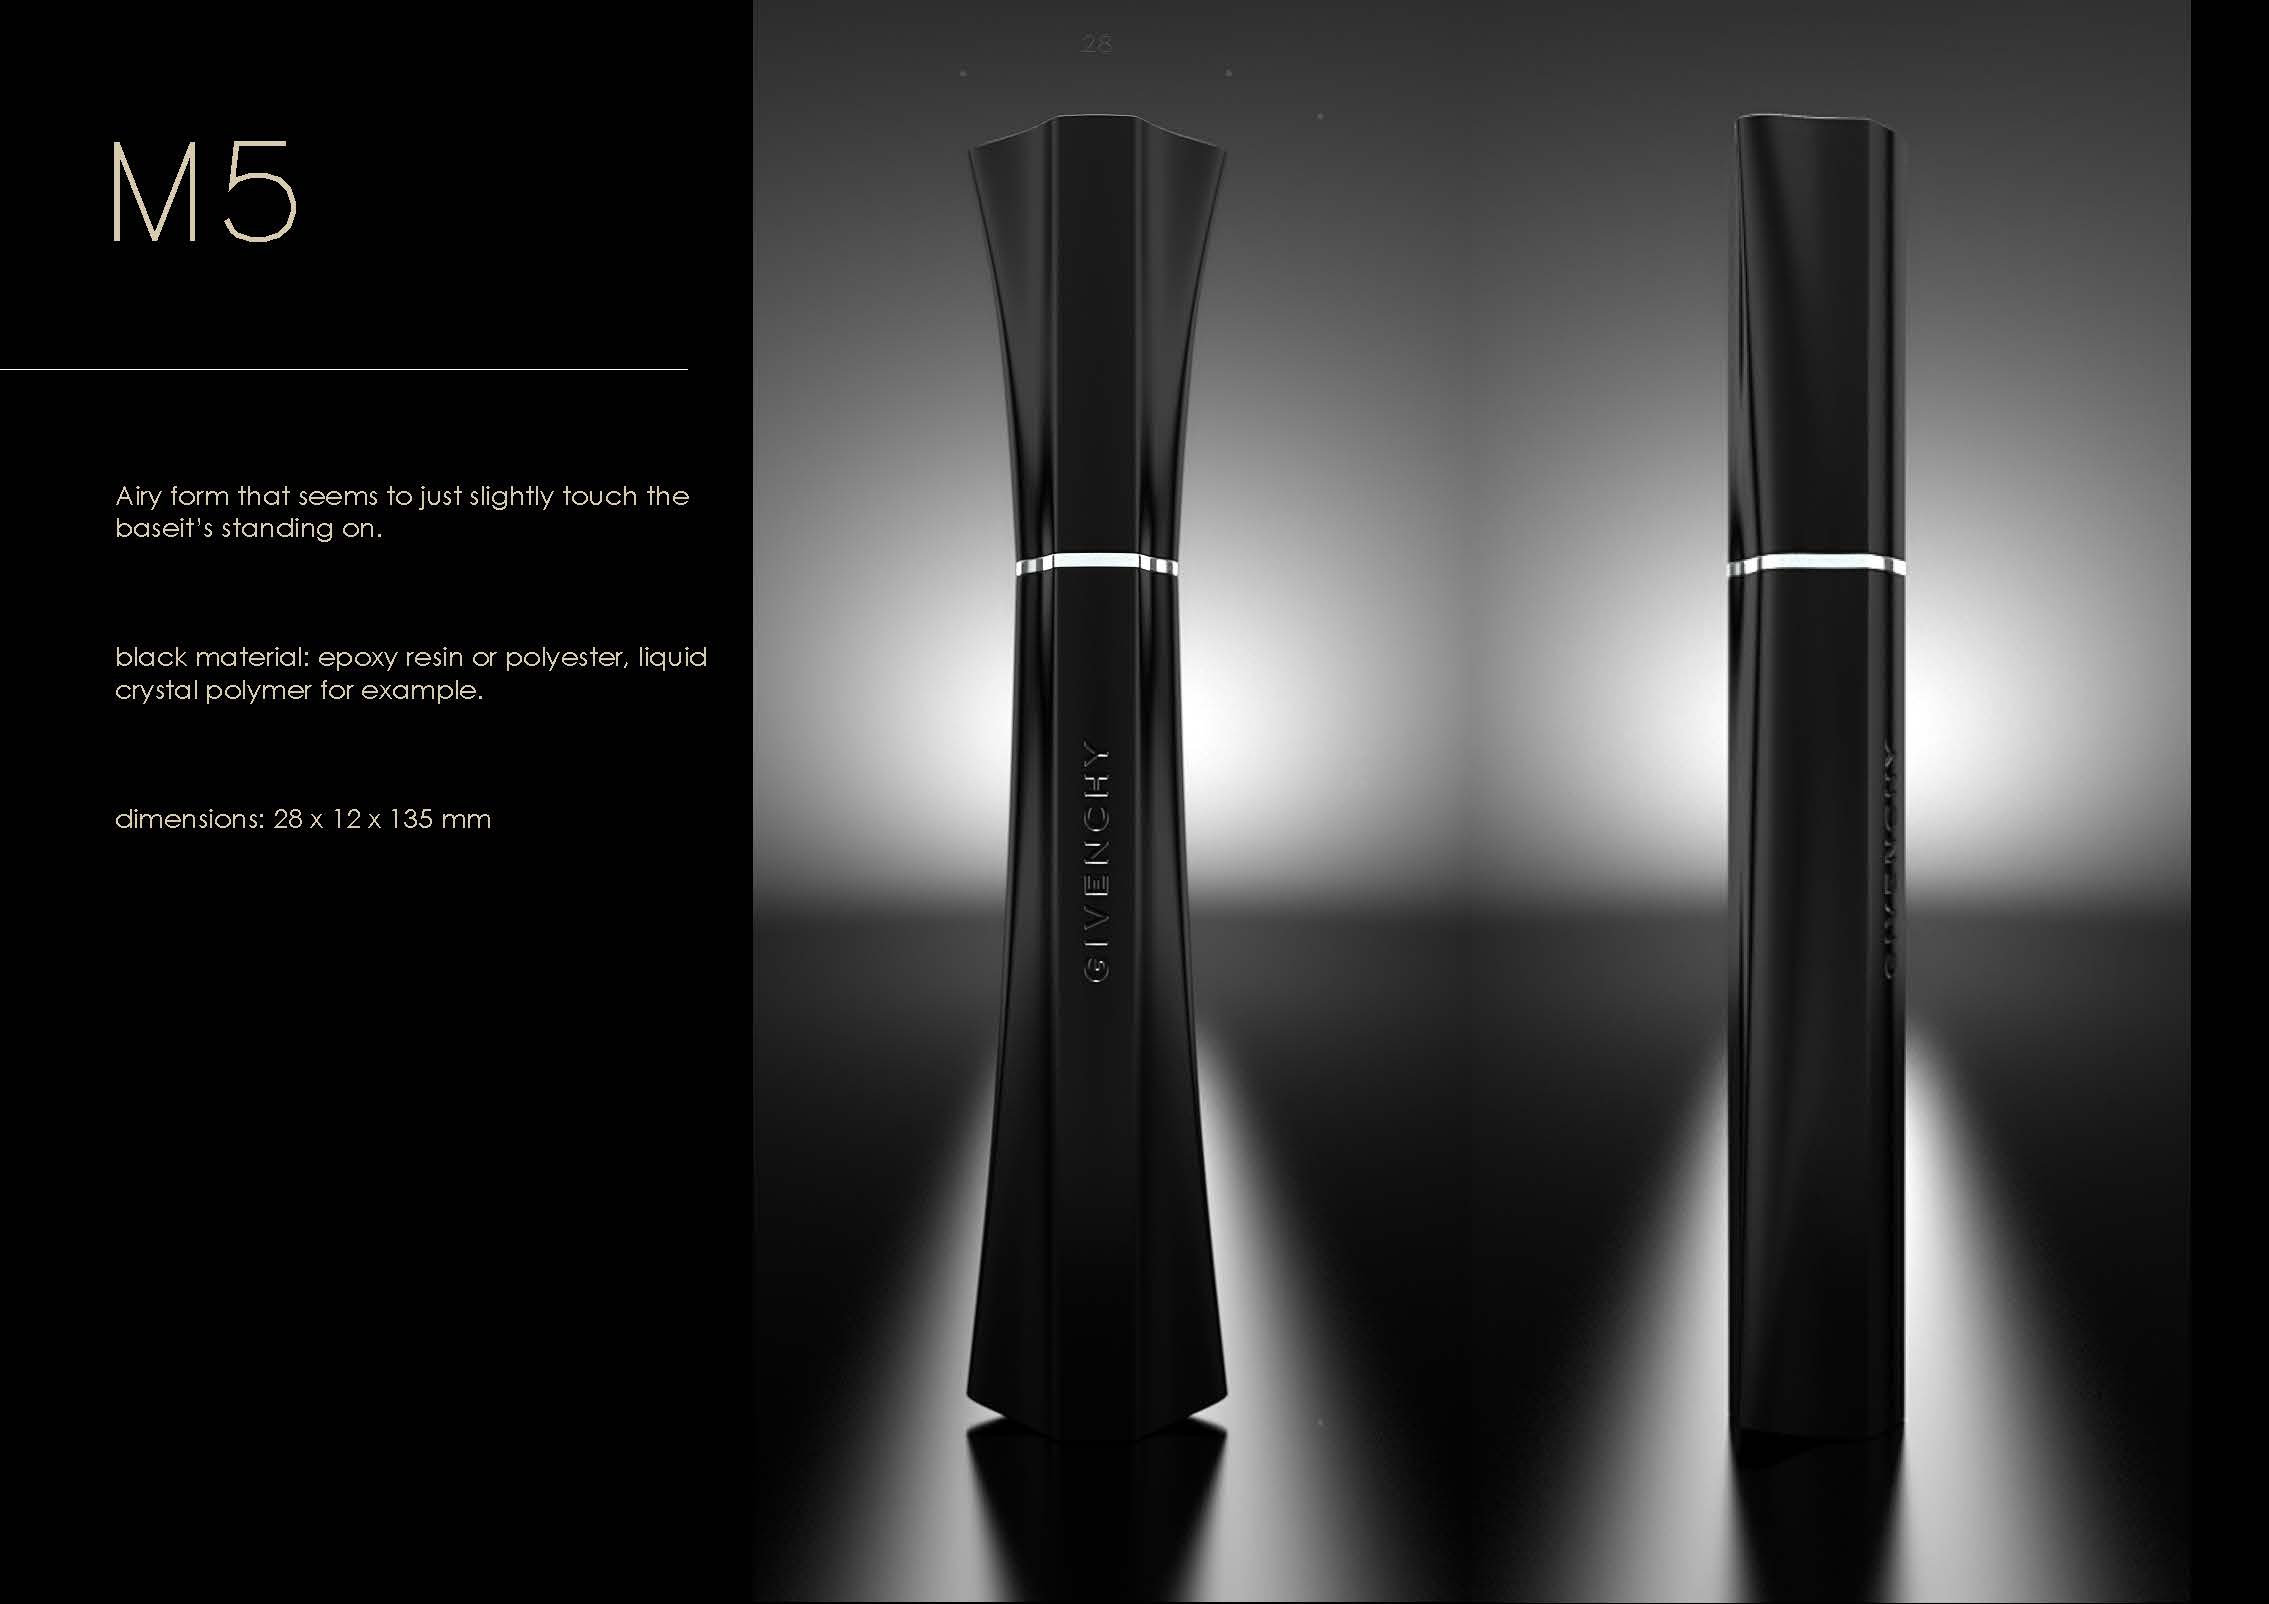 Givenchy mascaras w dimensions, I_Page_12.jpg